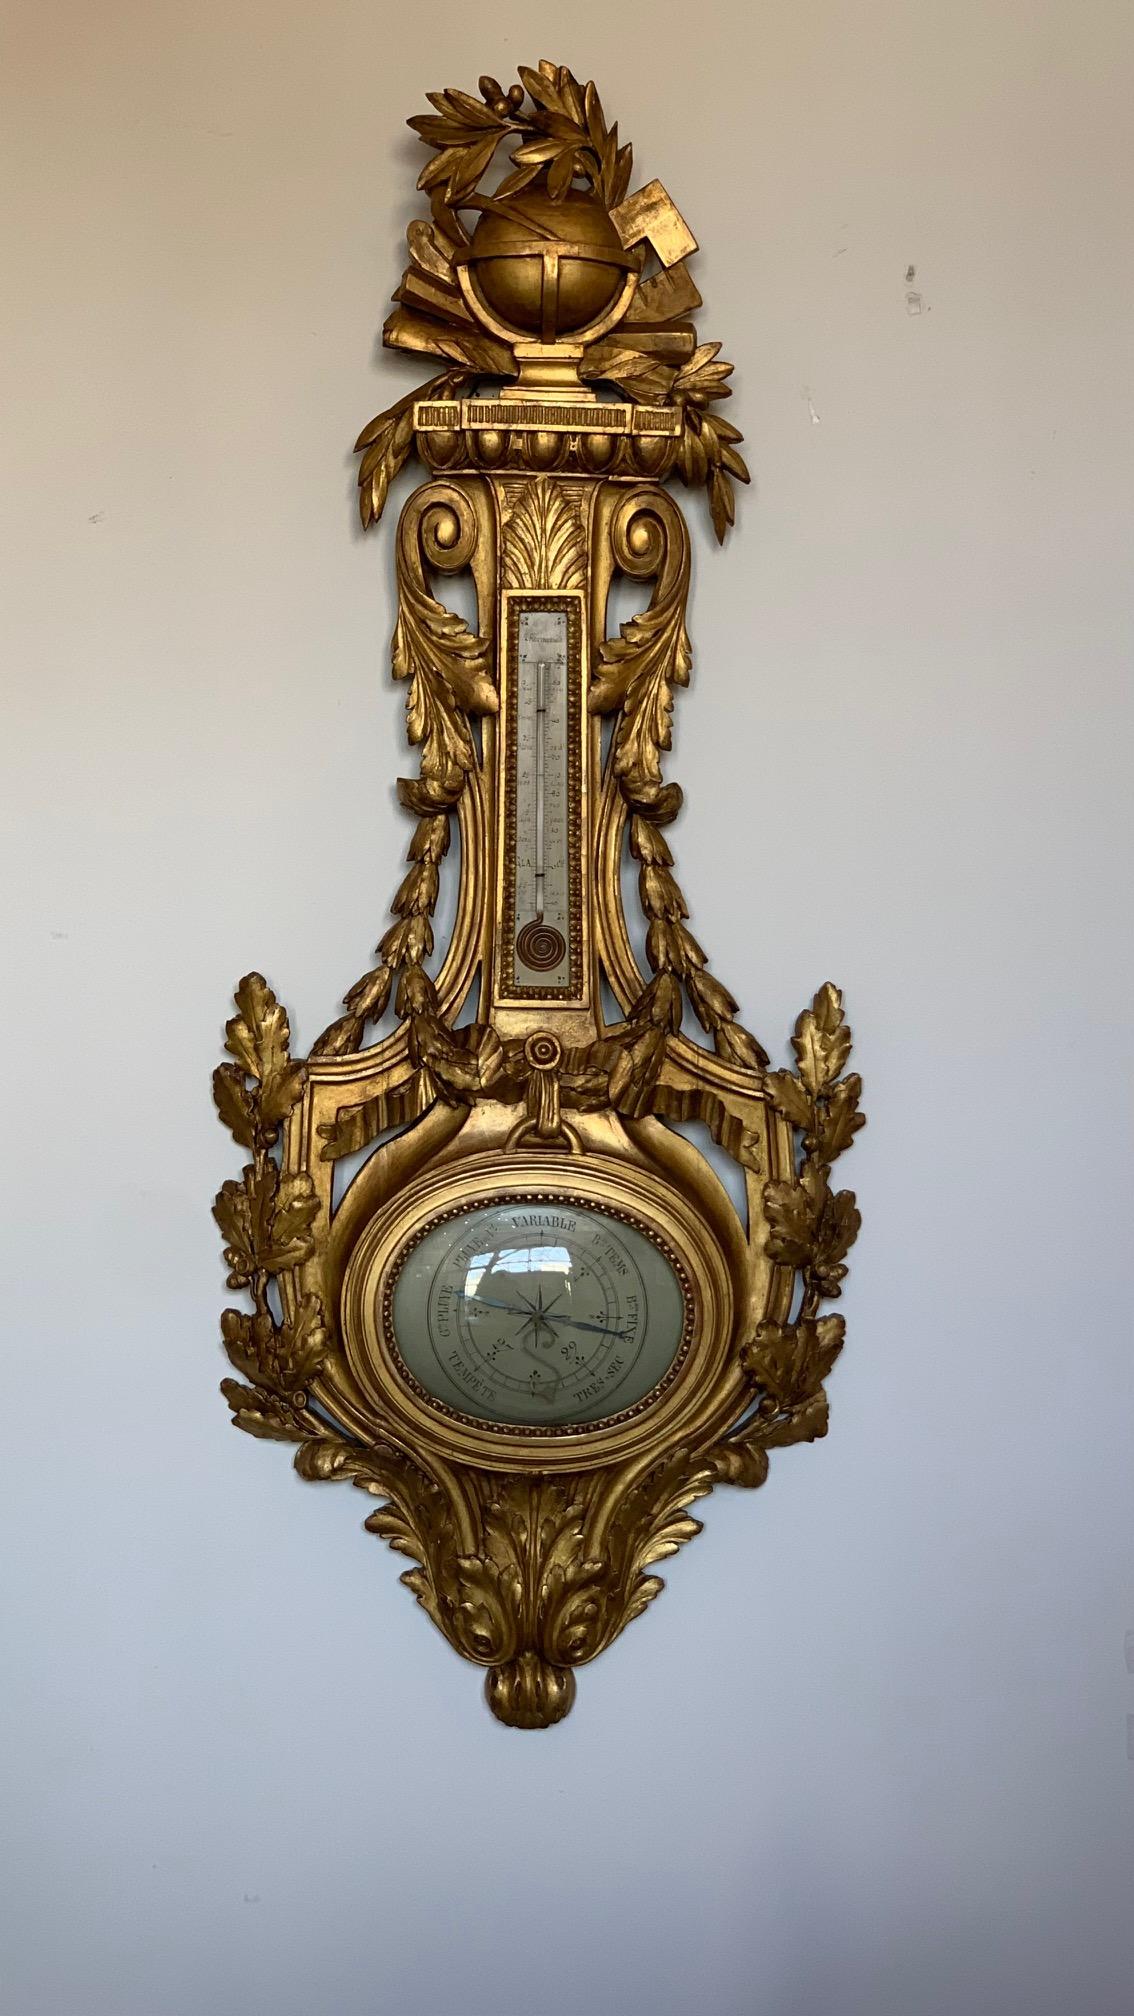 A very large French Louis XVI style baromete and termometer in gilt wood with a covex glass face. This highly decorative piece has carved oak leaves and acorns as well as acanthus leaves and a globe at the top. It appears to be late 19th century.